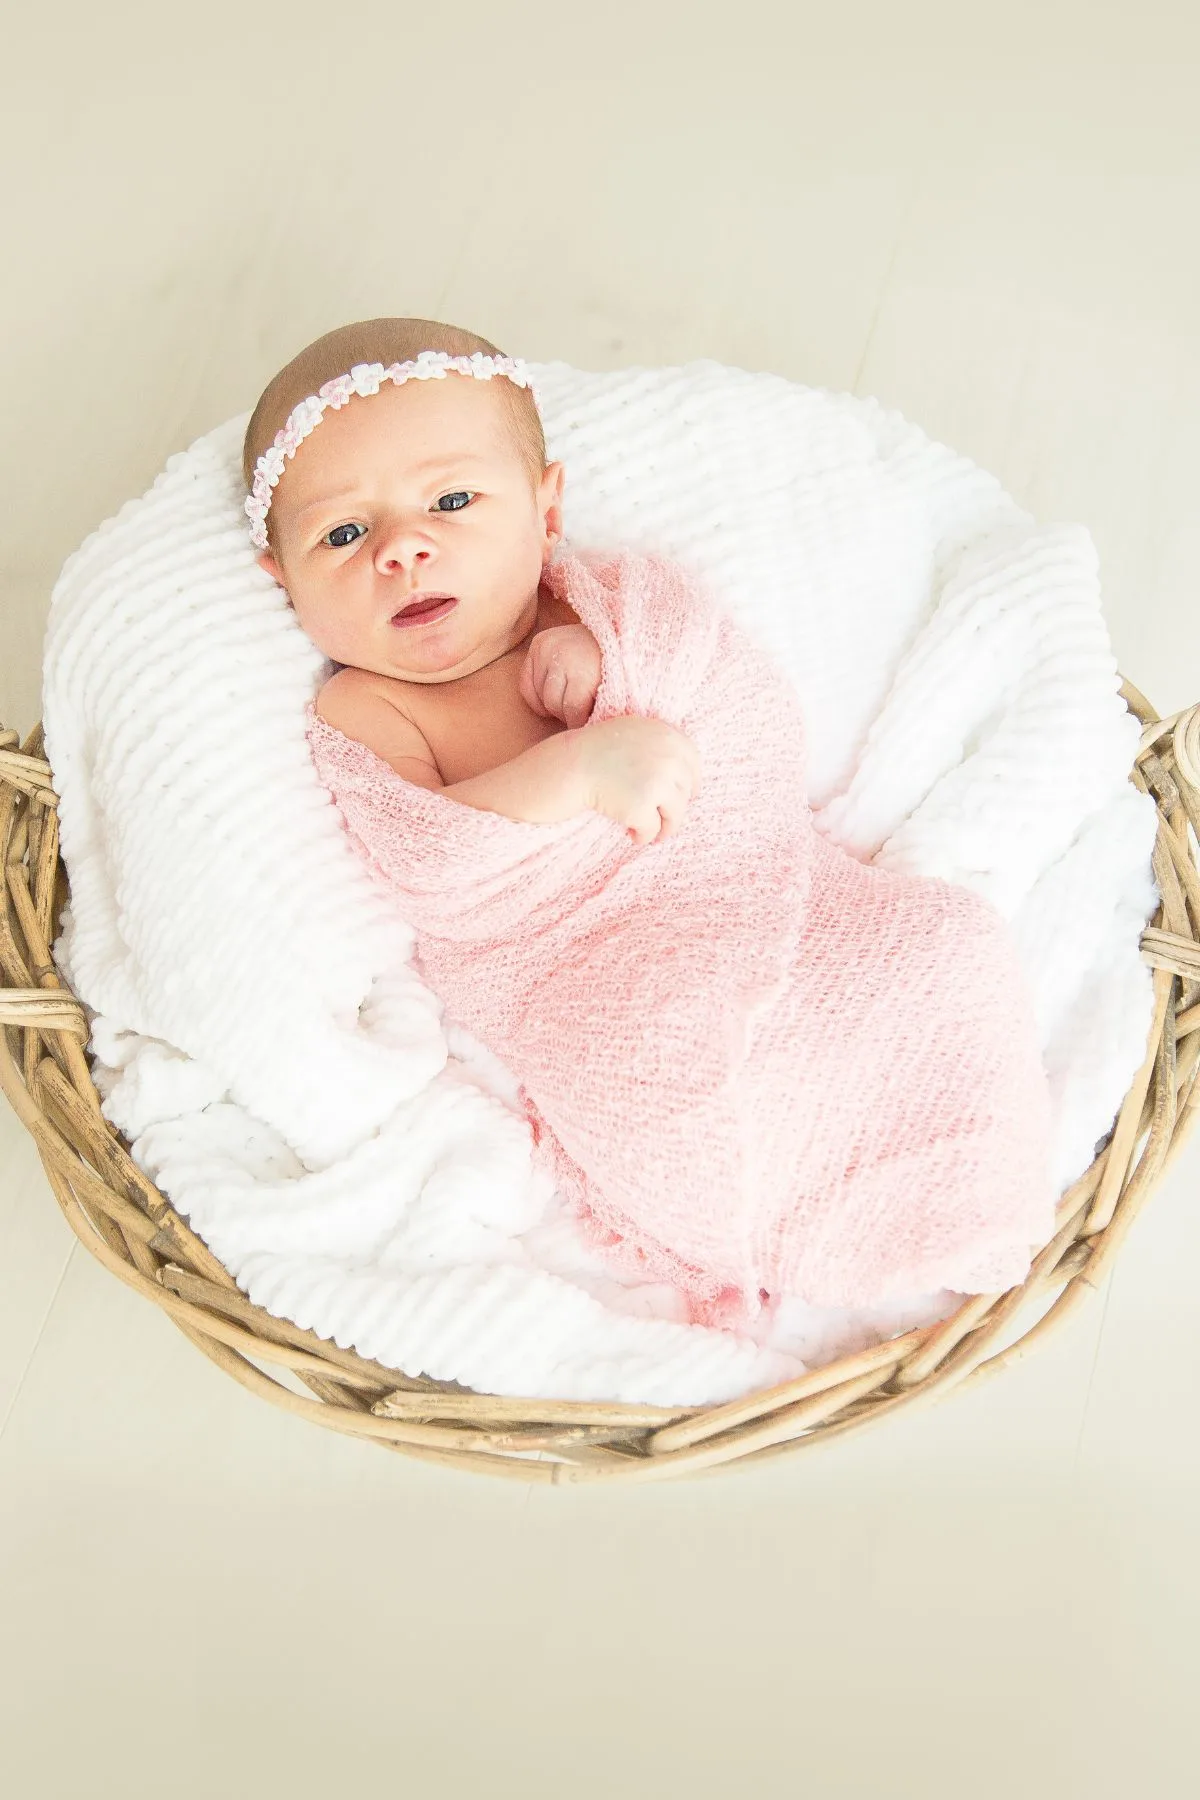 Baby girl in pink swaddle and headband resting on white blankets in wicker basket.